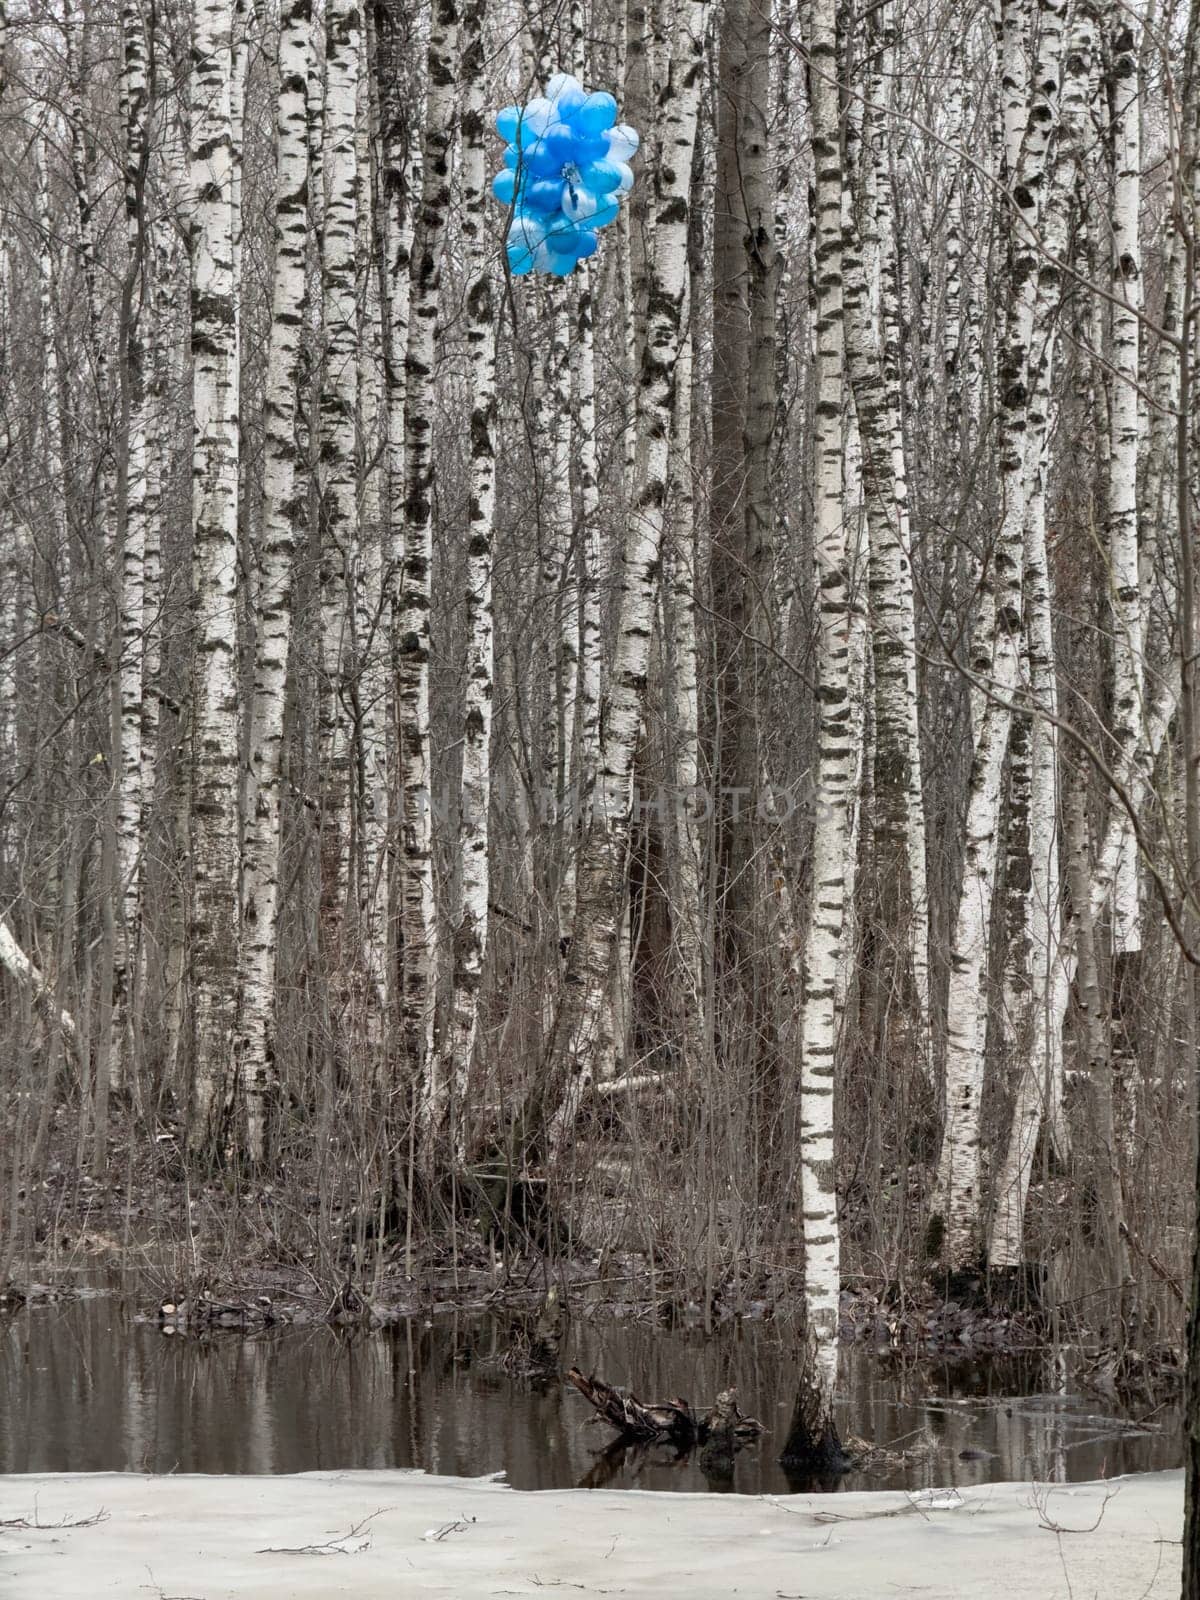 a bunch of blue balloons hang in a wild forest of birch trees in gray cloudy weather, a symbol of hope in a gray cruel world, without people, peace and quiet by vladimirdrozdin